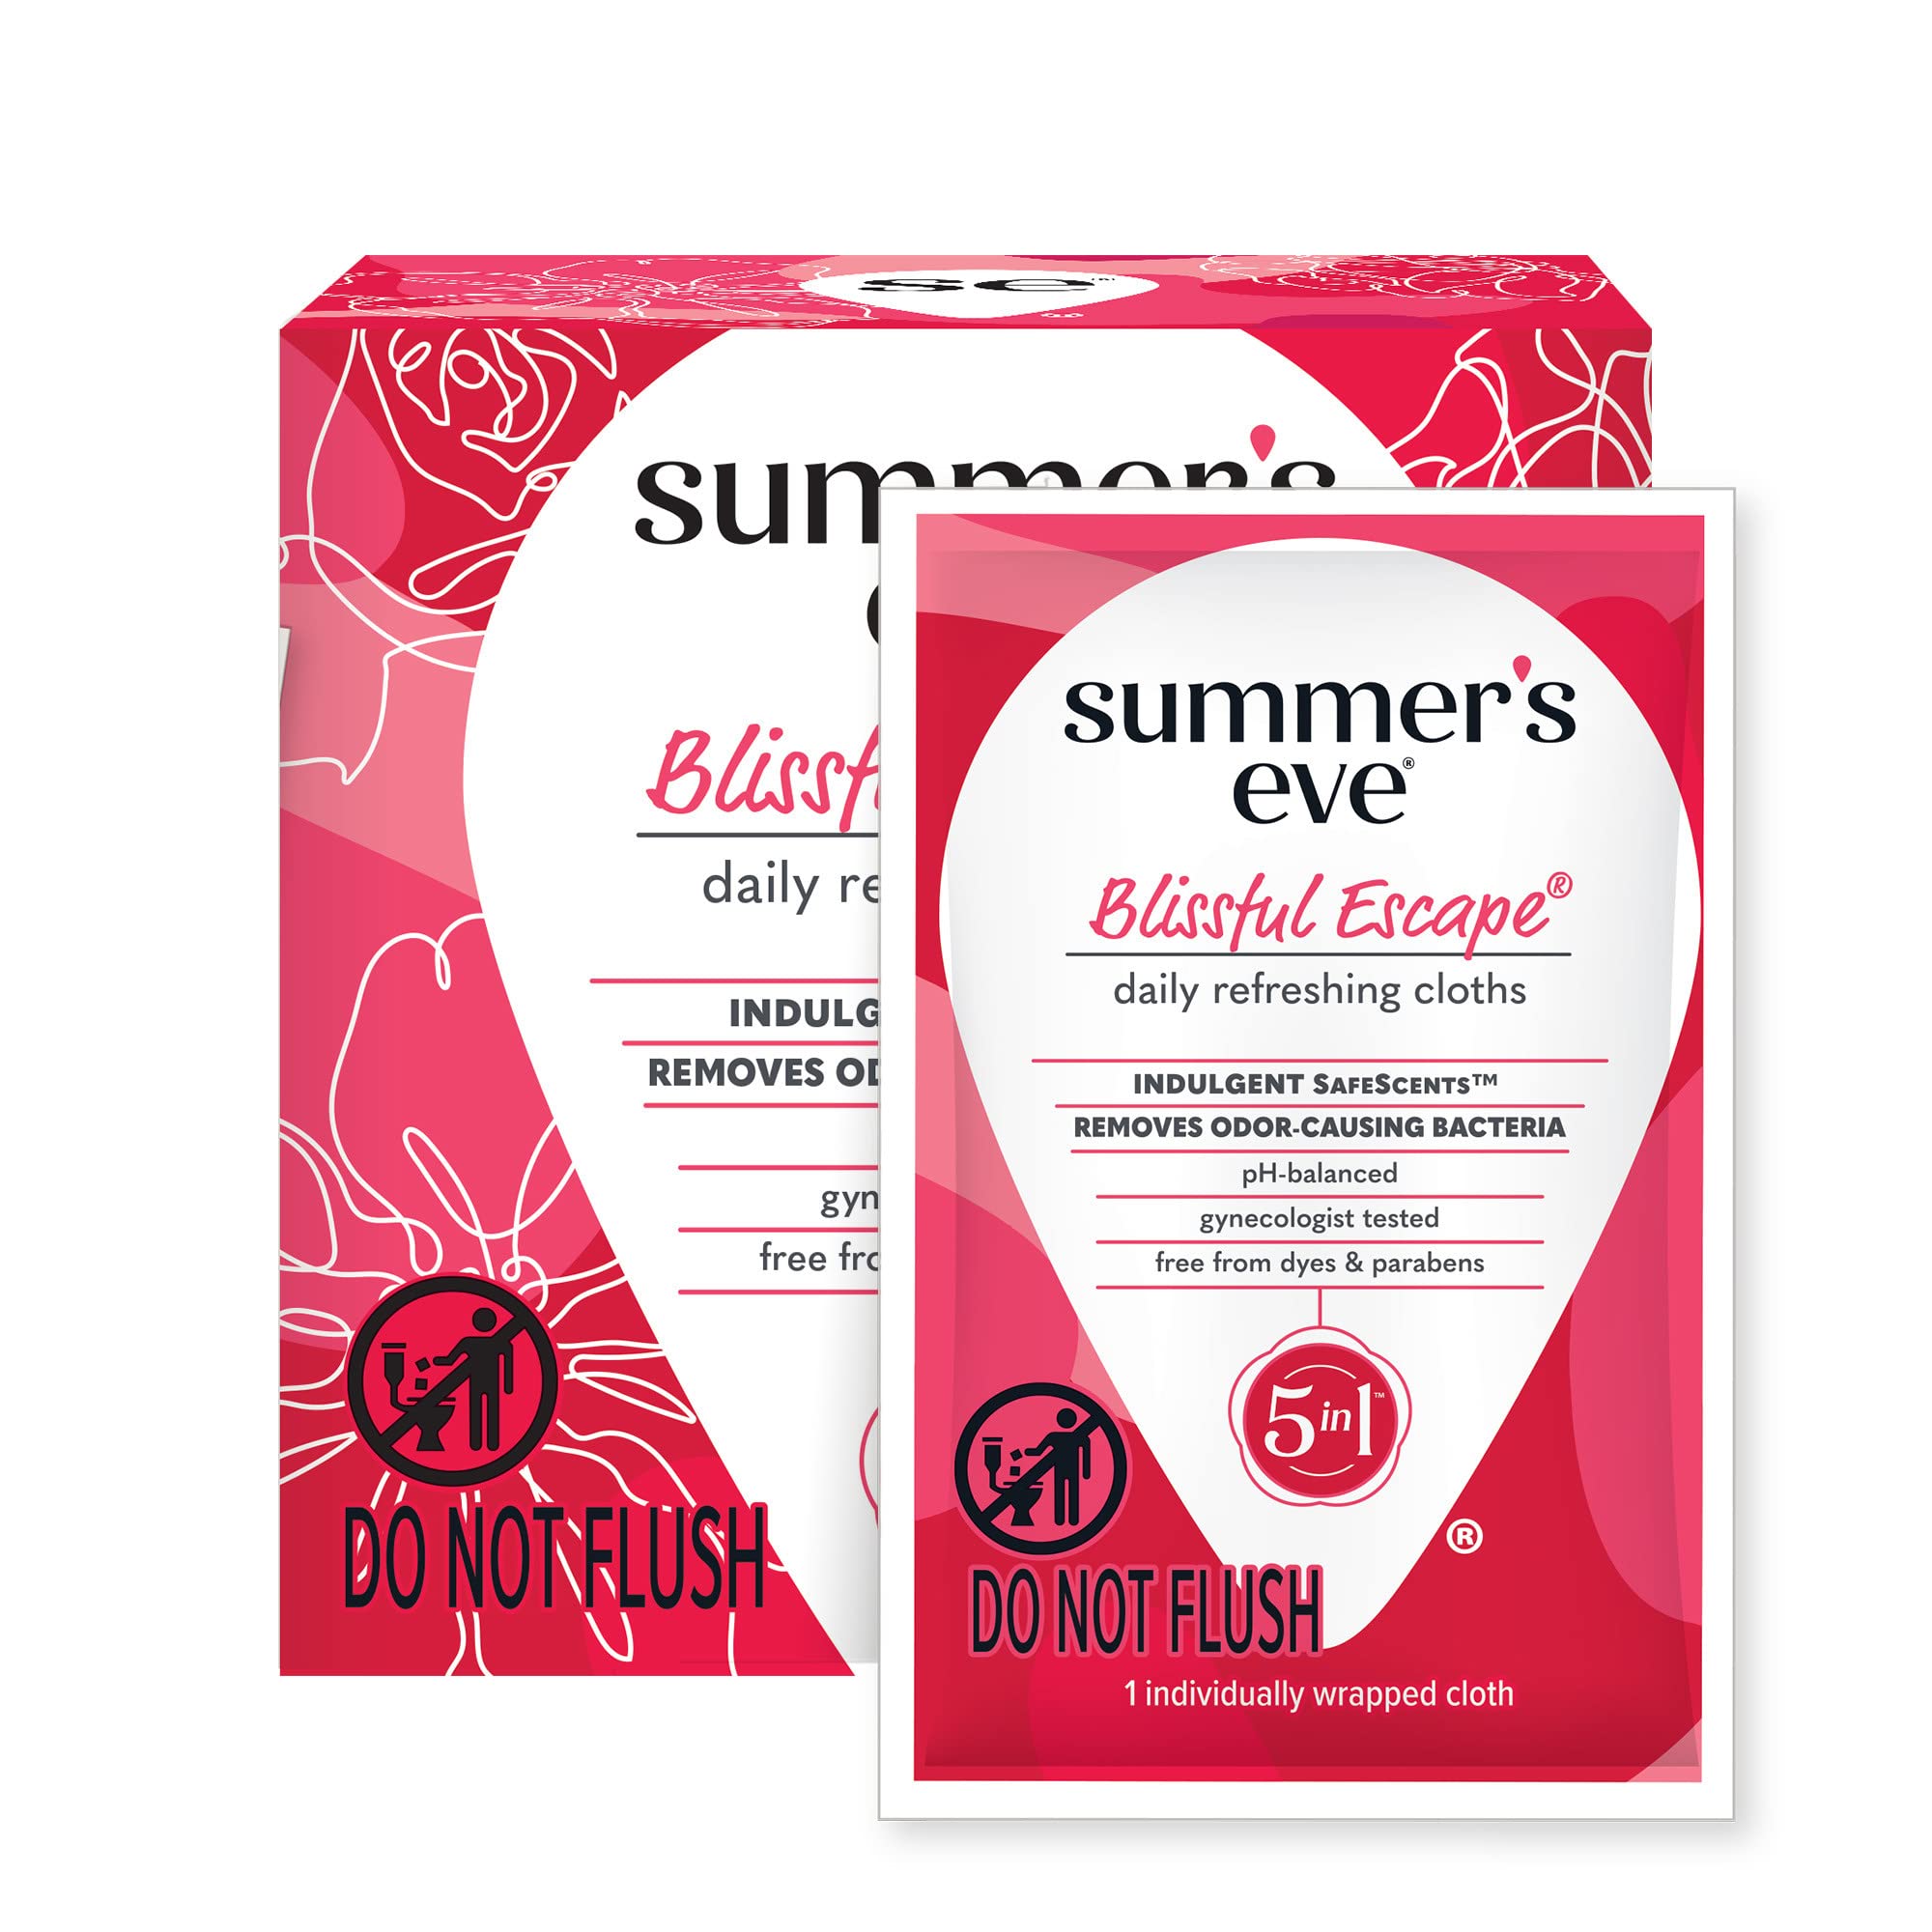 Summer's Eve Blissful Escape Daily Refreshing Feminine Wipes, Removes Odor, pH balanced, 16 count: $1.86 or lower w/S&S